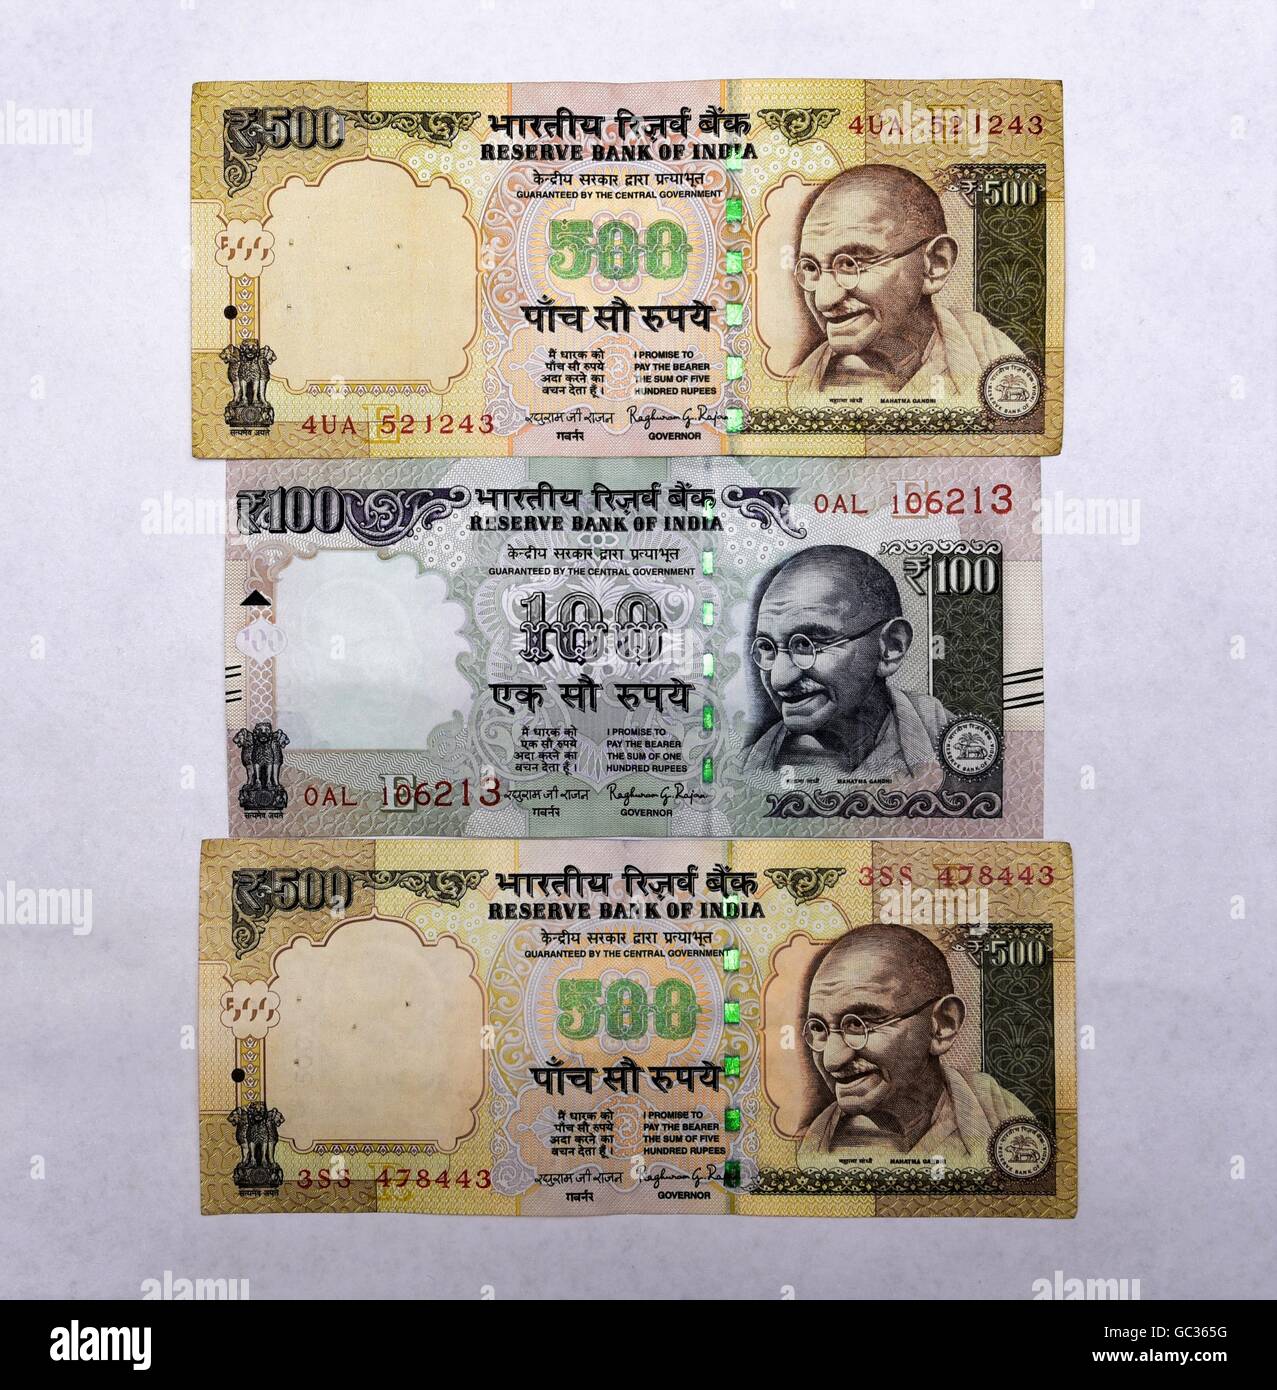 Indian currency notes of rupees 100 and 500 value Stock Photo